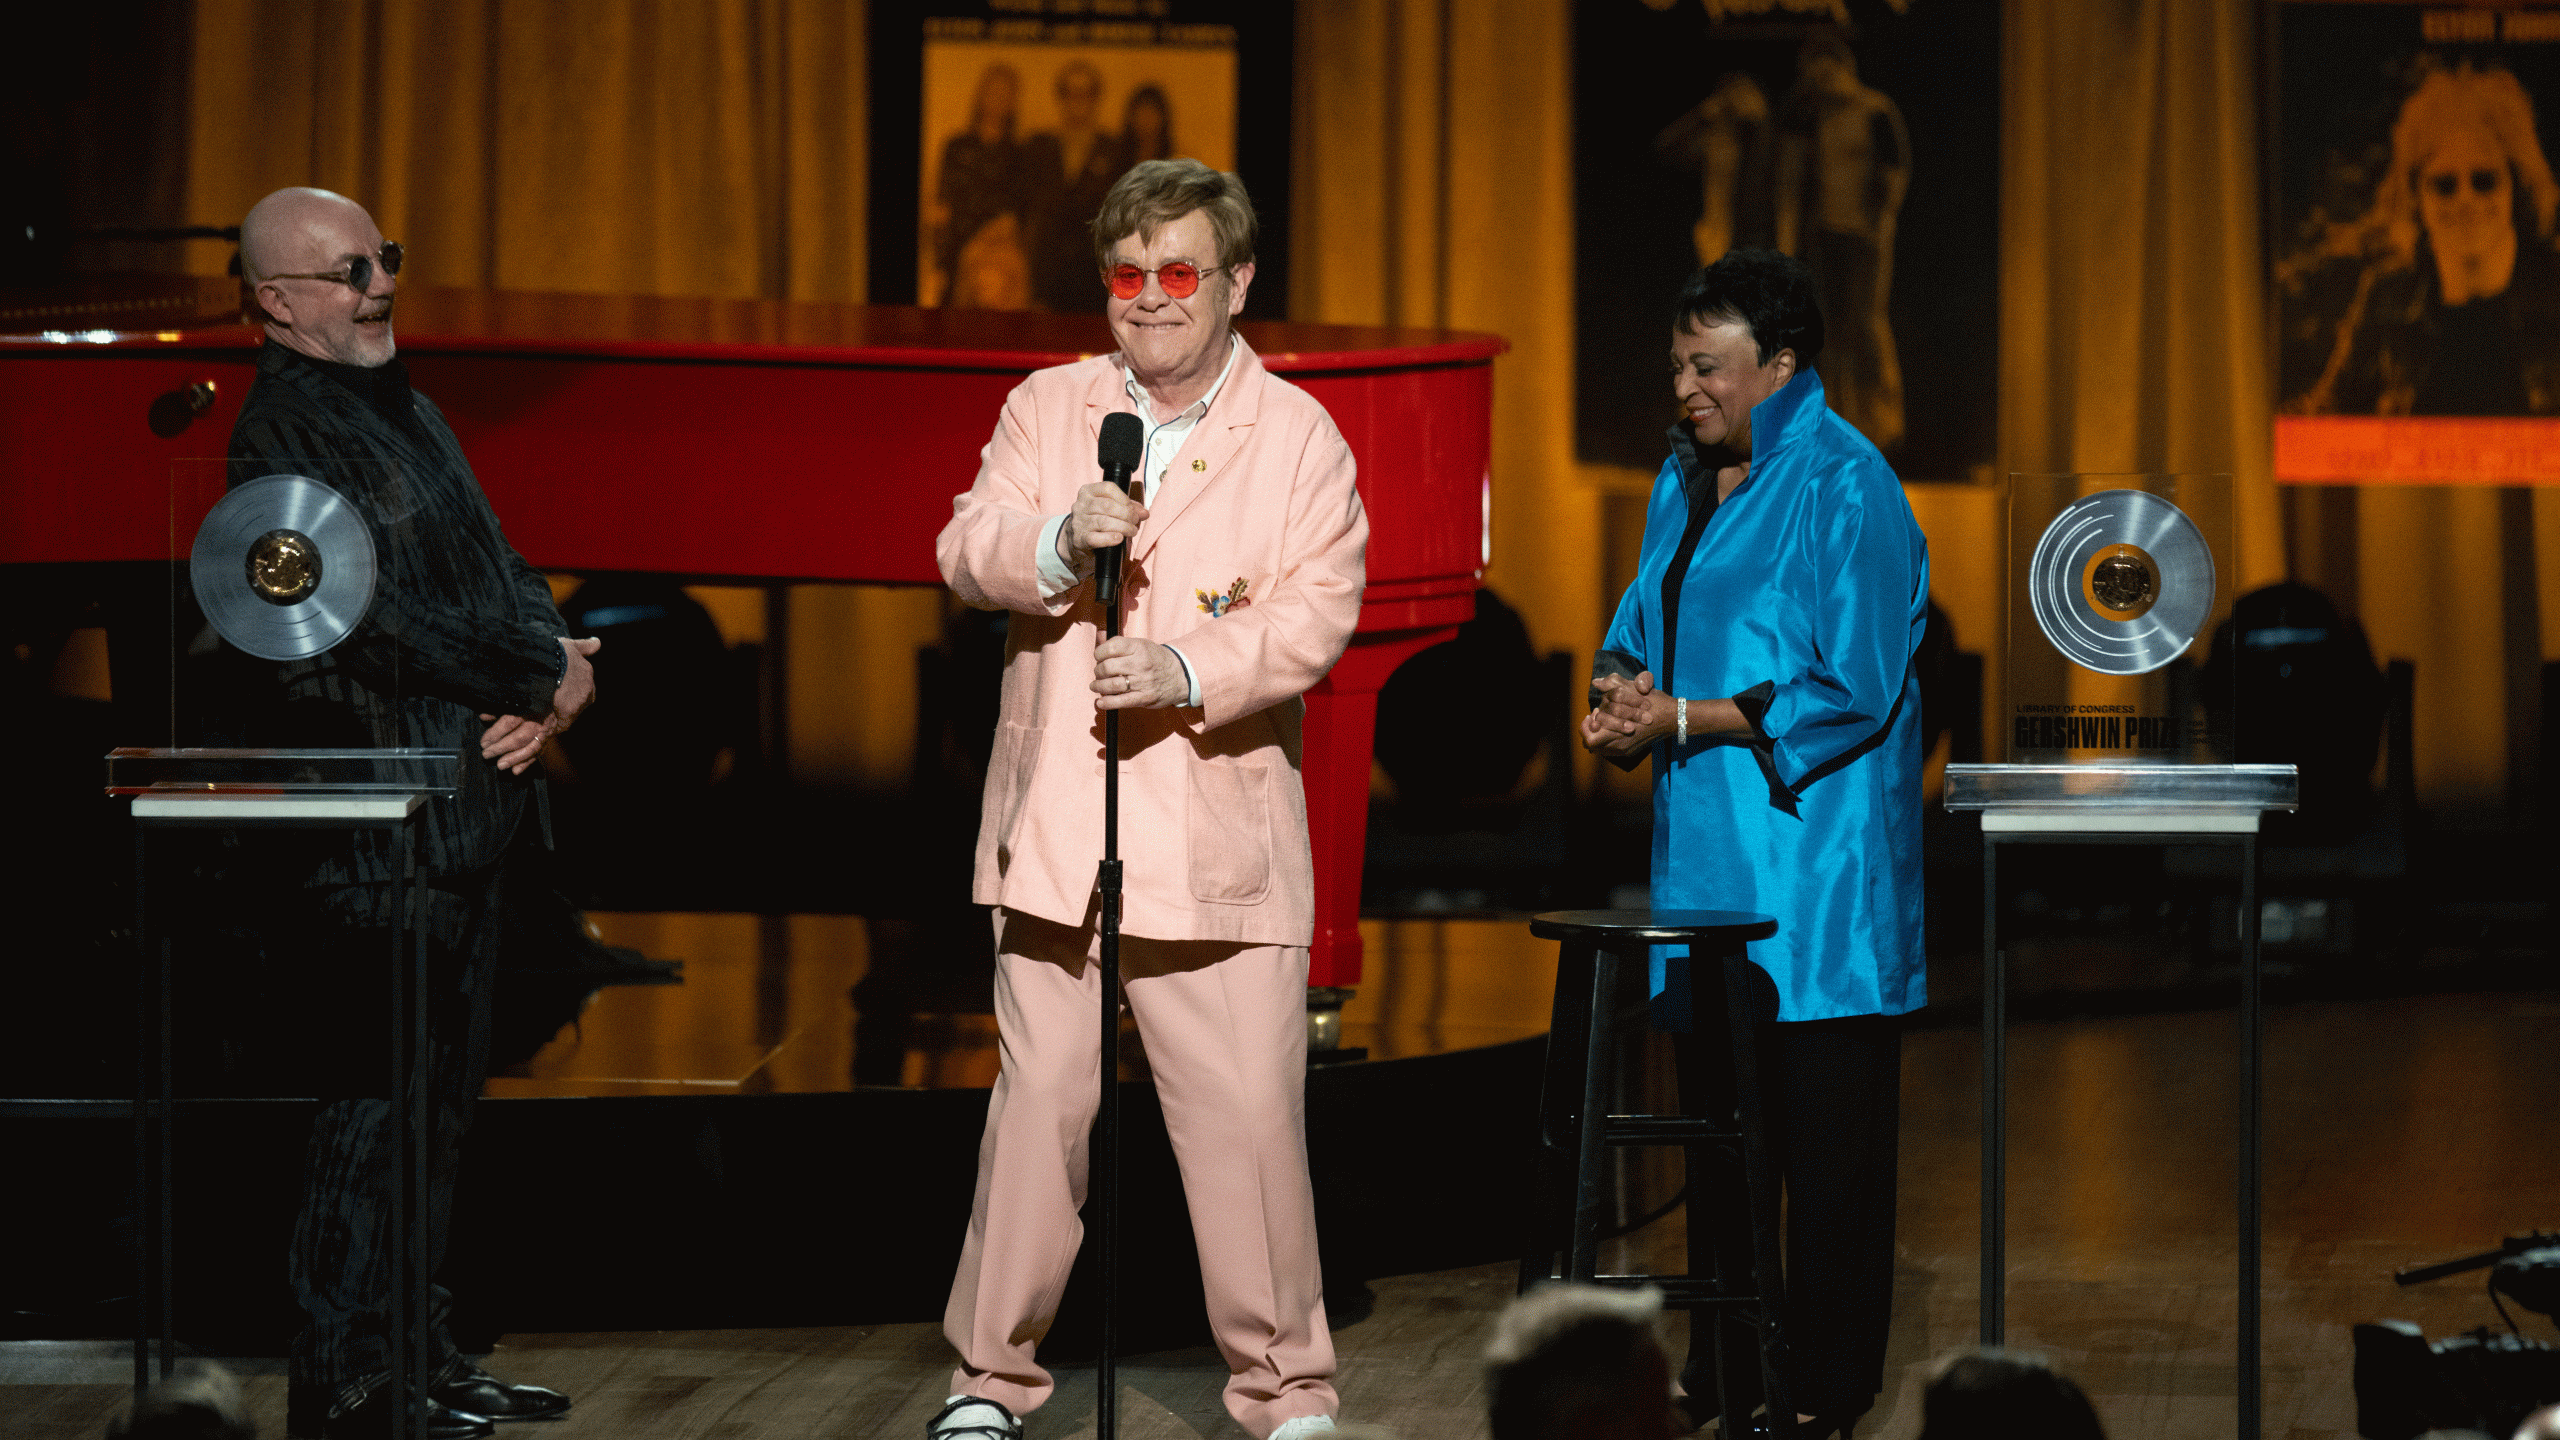 Elton John and Bernie Taupin honored with prestigious Library of Congress Gershwin Prize